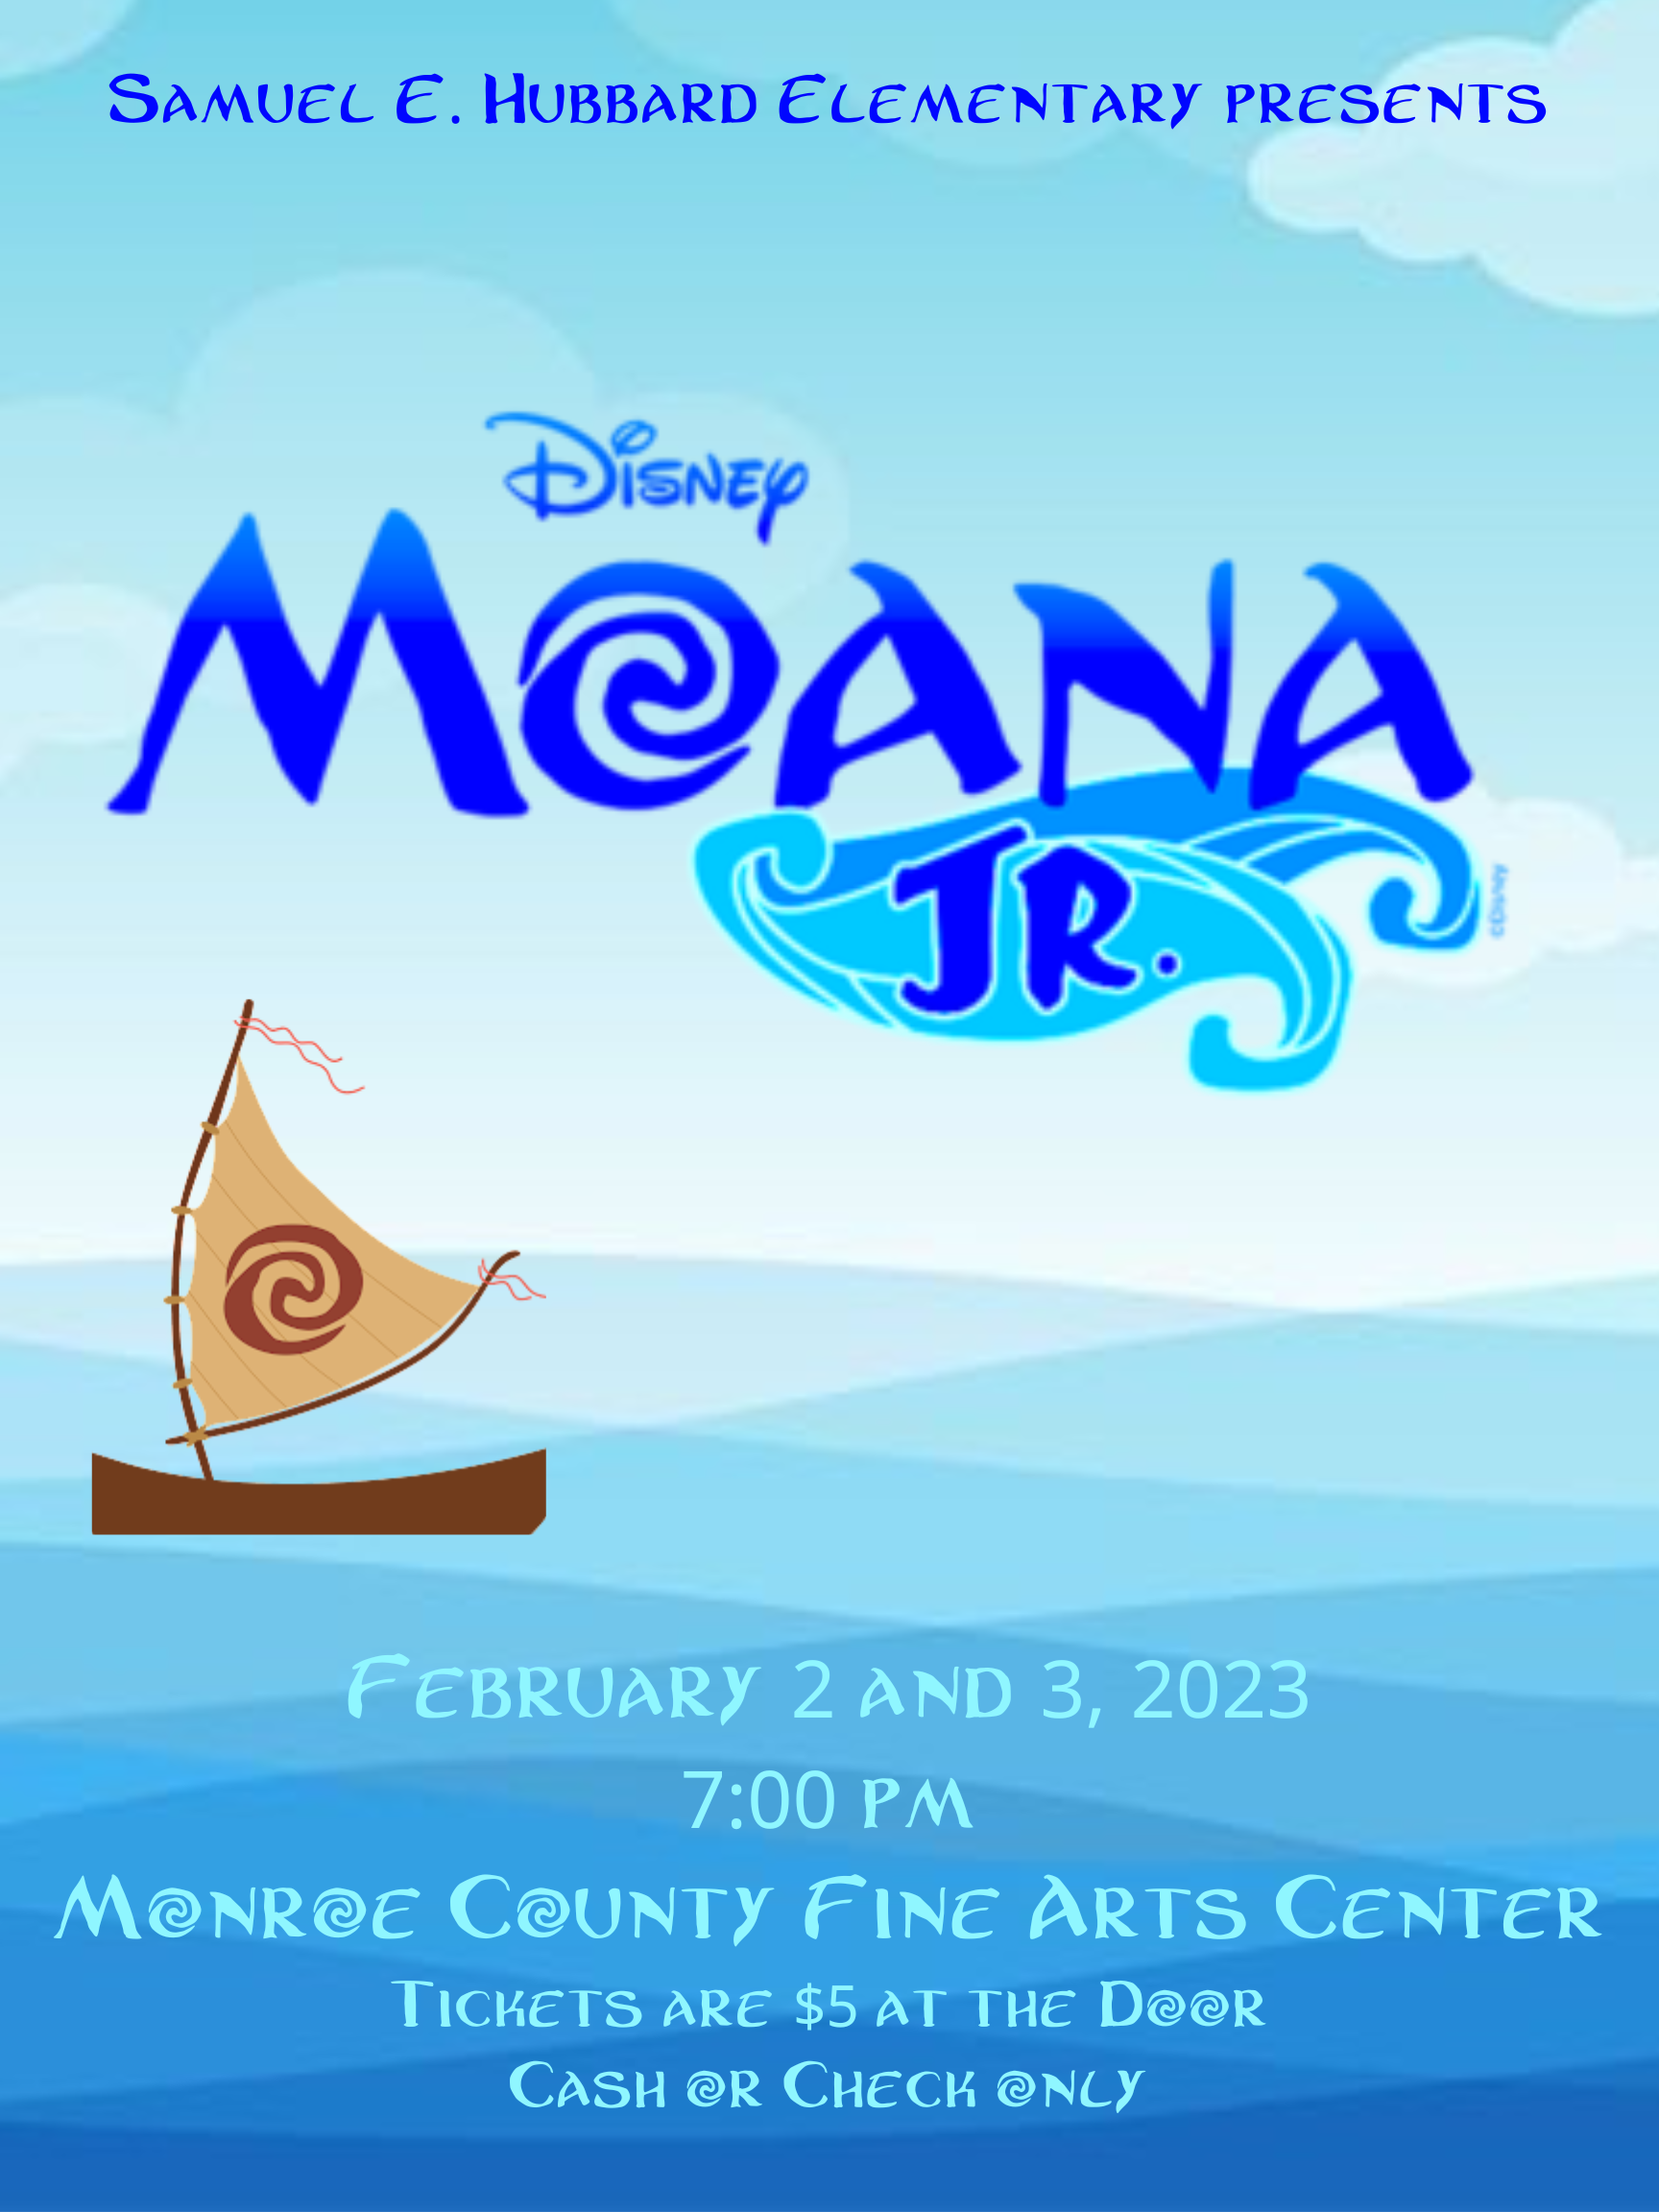 Samuel E. Hubbard Elementary presents Disney's Moana Jr on February 2 and 3 at 7 p.m. at the monroe county fine arts center.  Tickets are $5 at the door.  Cash or check only. 